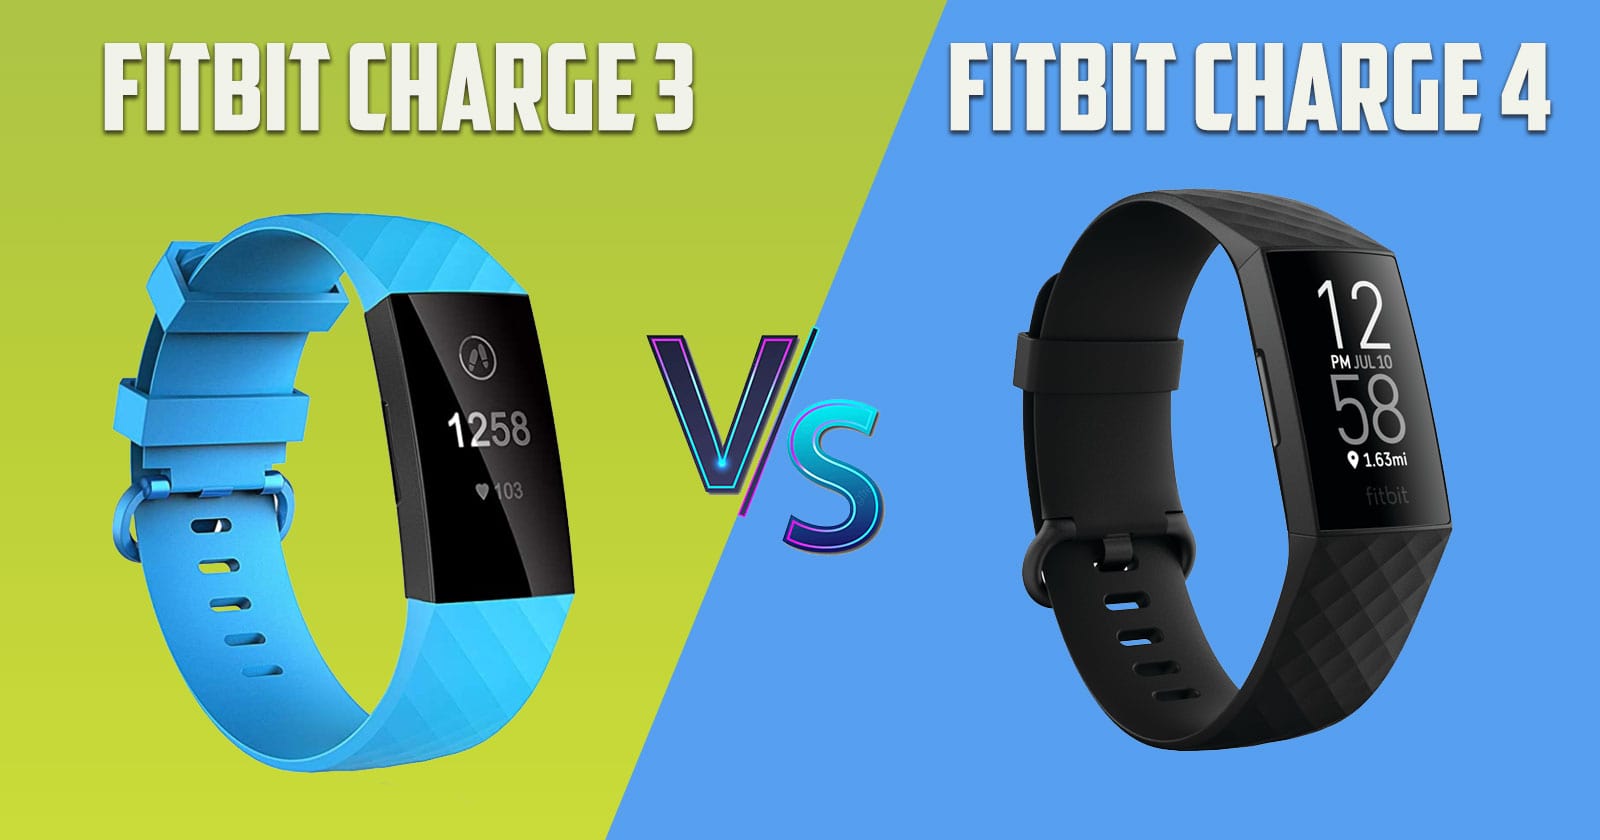 What Is the Difference Between Fitbit Charge 3 and 4